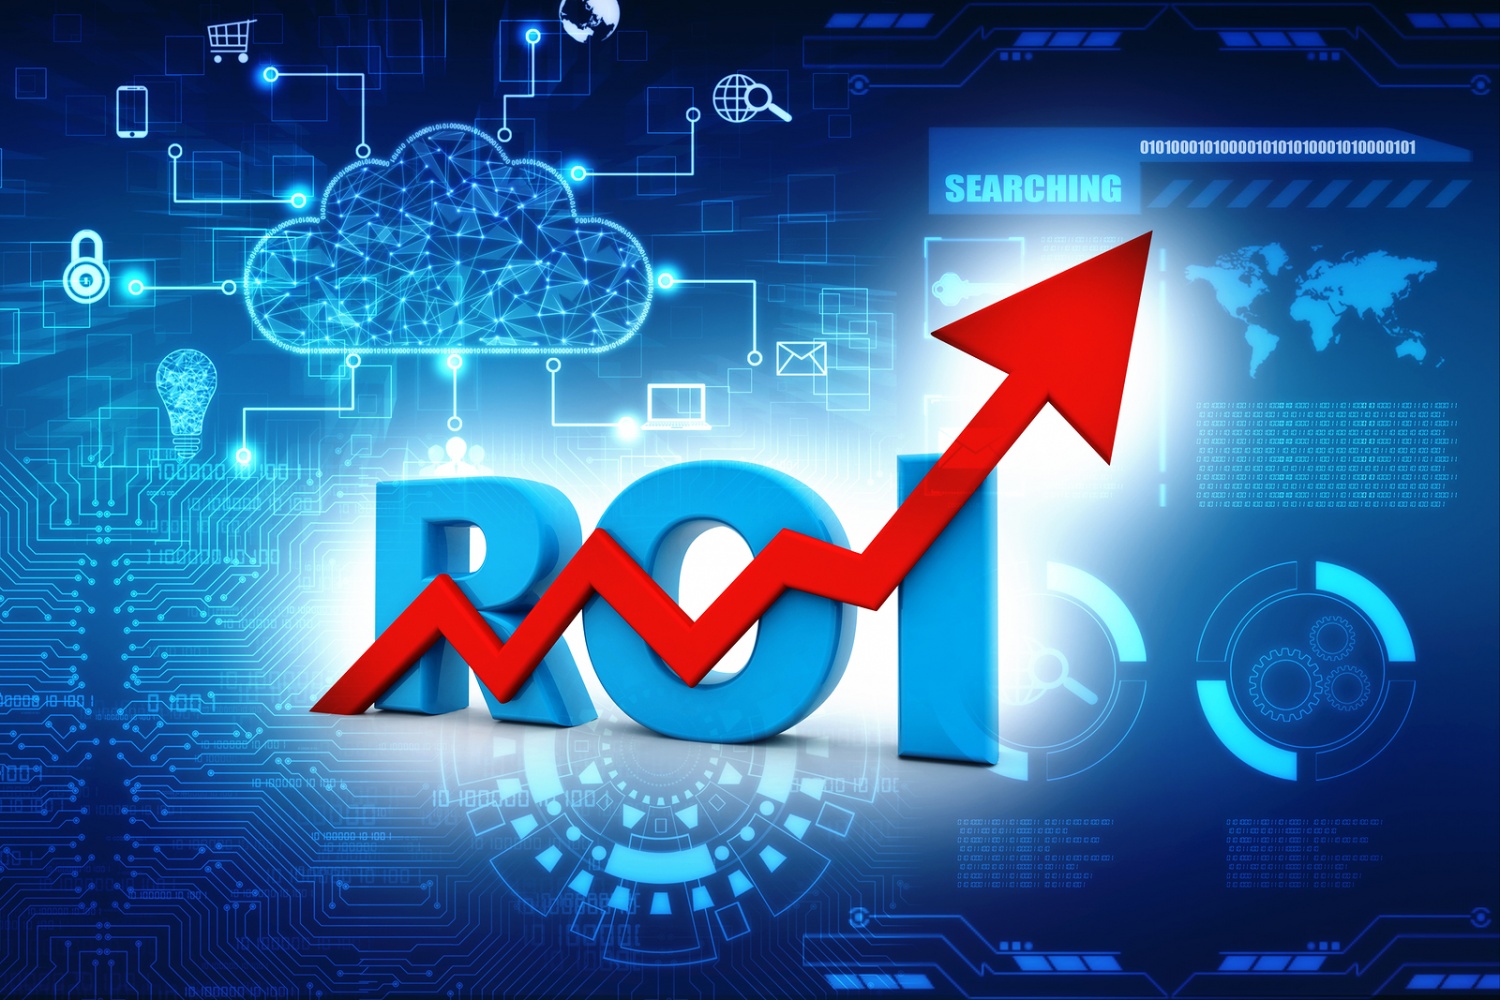 3 Simple Tips for Digital Businesses to Increase Their Marketing ROI